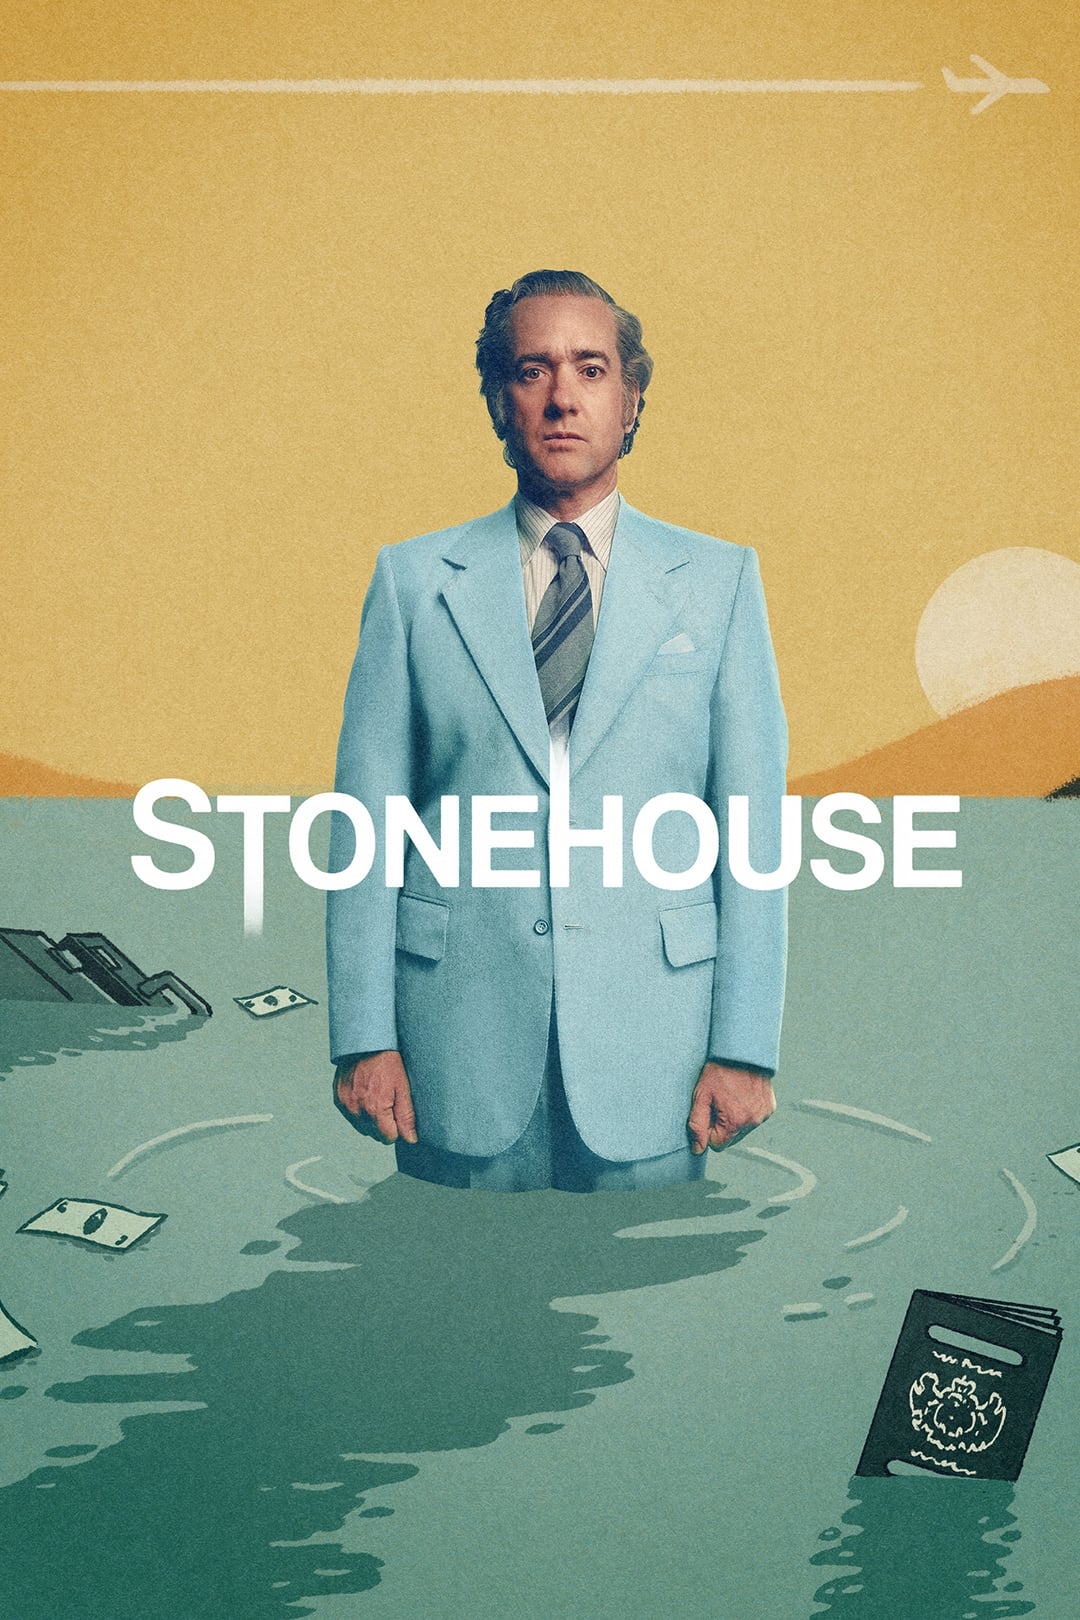 Stonehouse TV Shows About Based On True Story